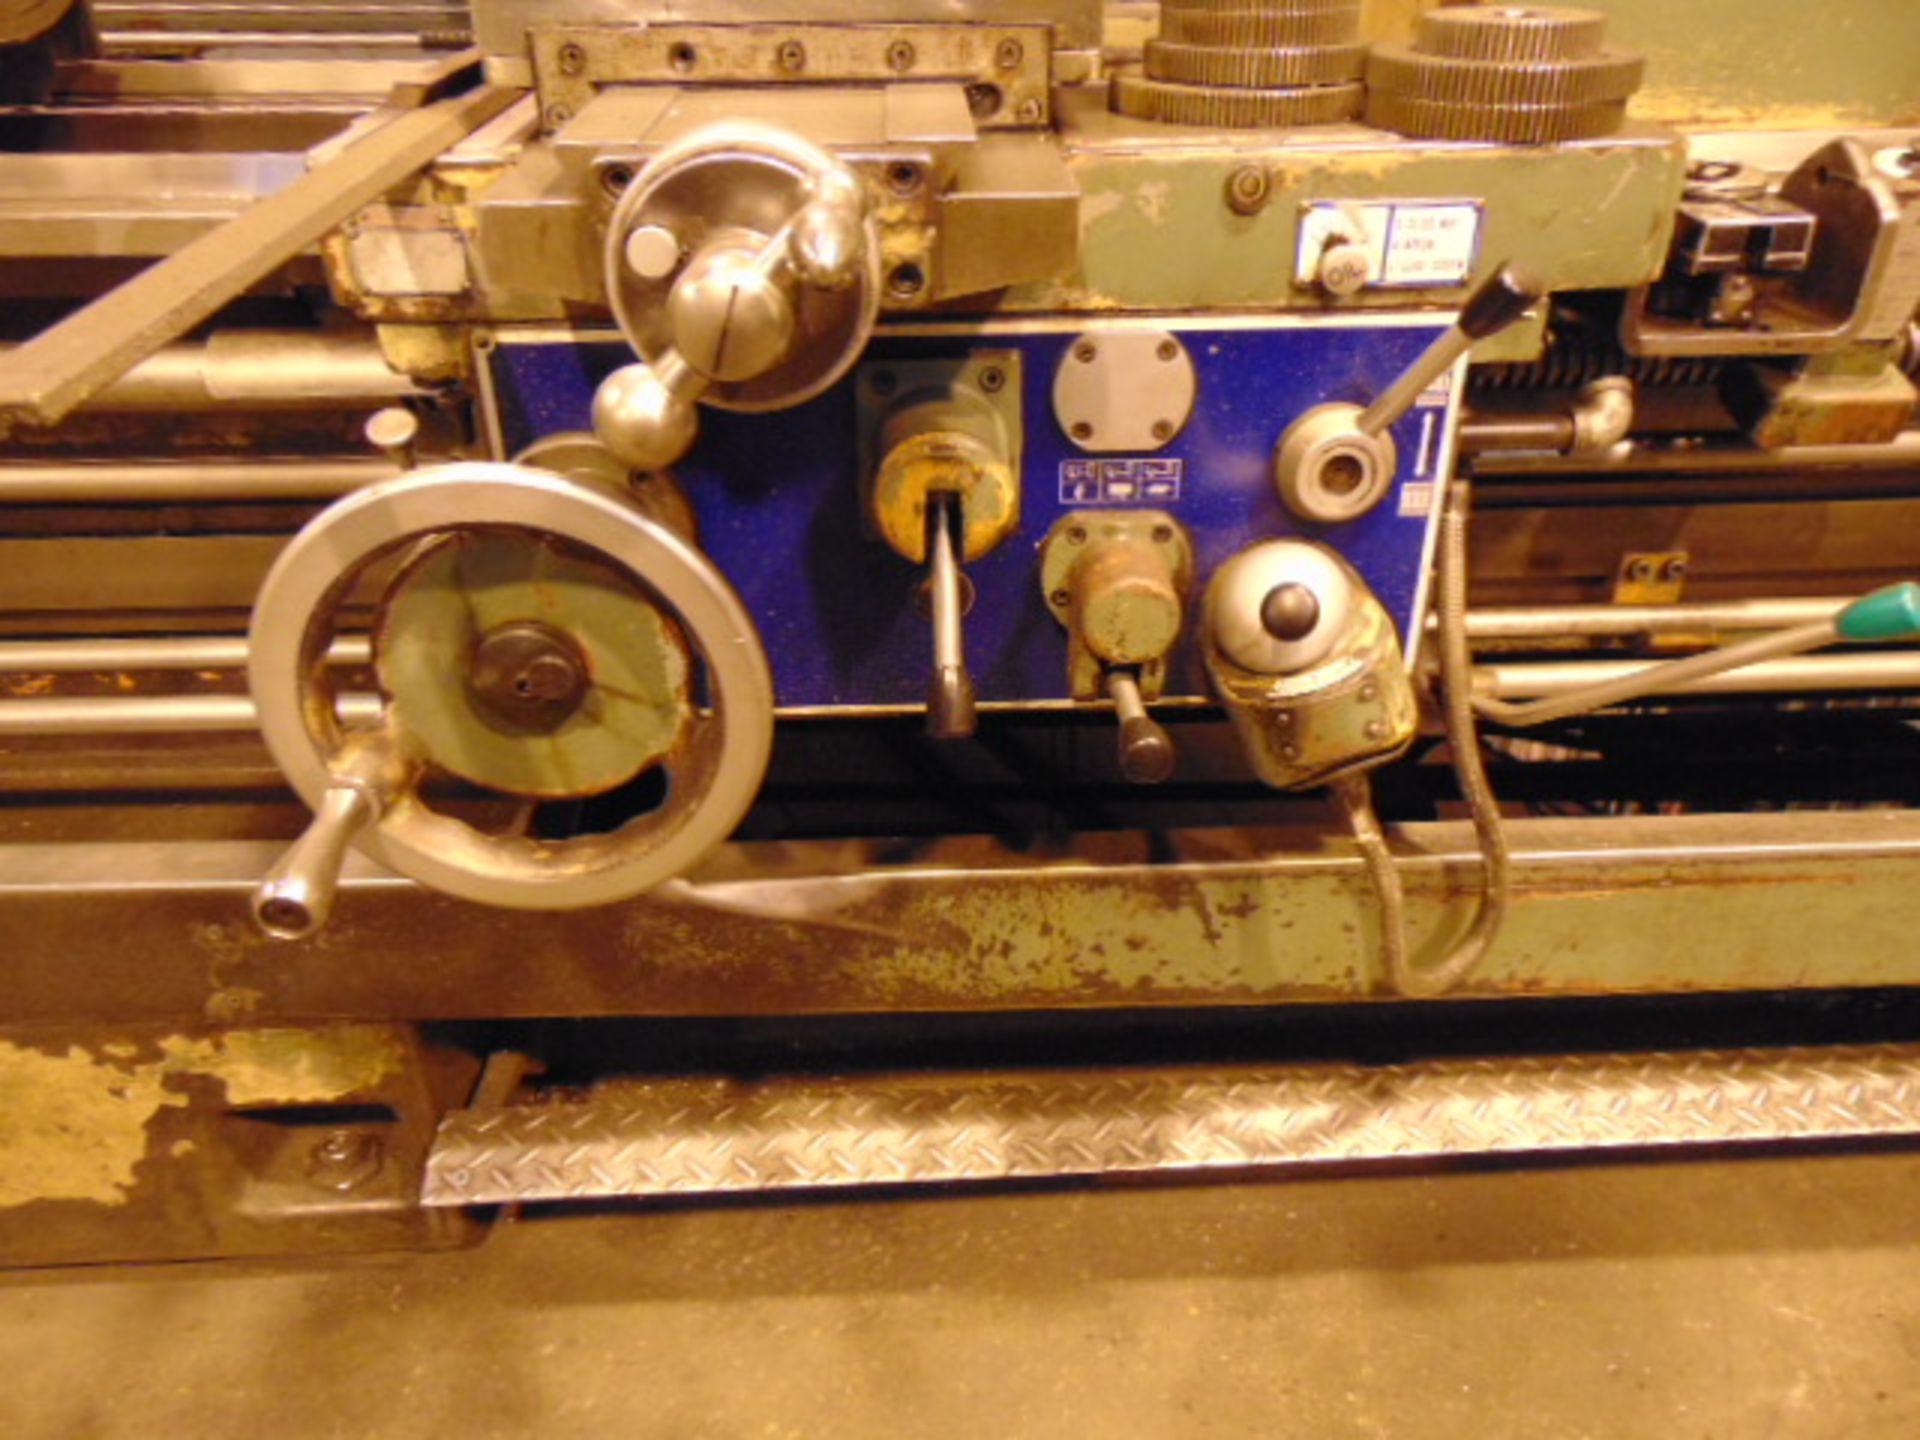 GAP BED ENGINE LATHE, KINGSTON 30” X 80” MDL. HR2000 HEAVY DUTY, new 1996, 24-3/4” dia. 4-jaw chuck, - Image 7 of 17